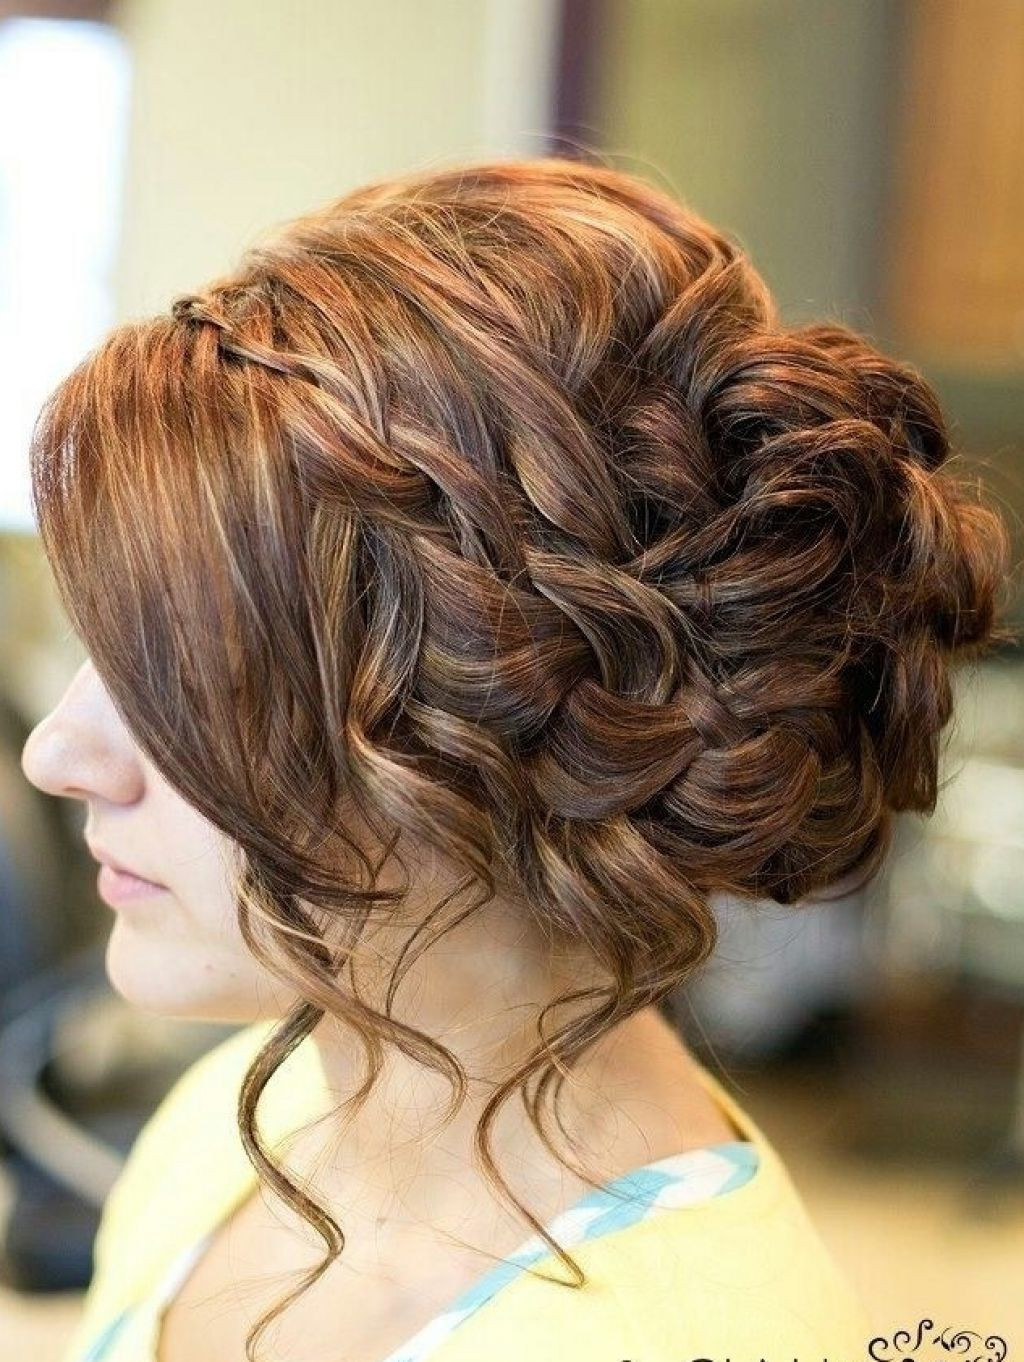 Updo Prom Hairstyles
 14 Prom Hairstyles for Long Hair that are Simply Adorable